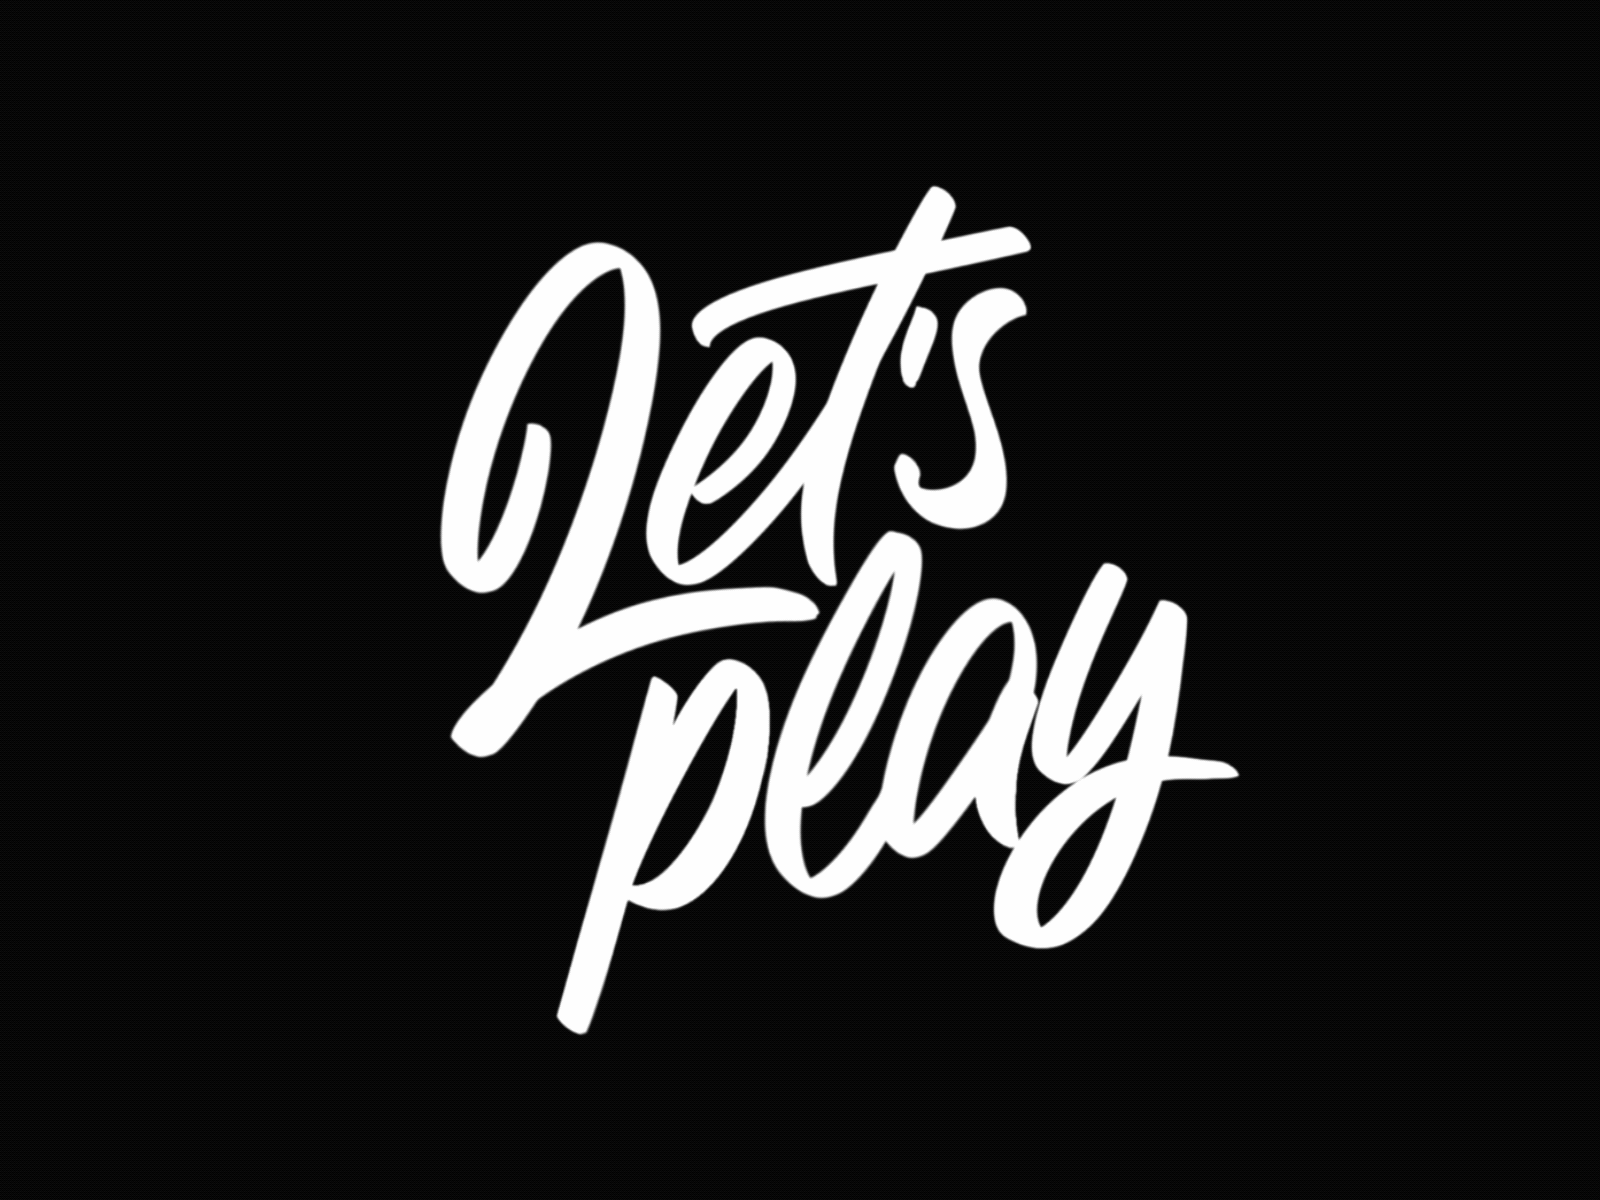 Let’s play. Lettering calligraphy animation apparel design calligraphy design graphic design handlettering illustration letter lettering ligature logo logotype motion graphics package script streetwear type typo typography vector